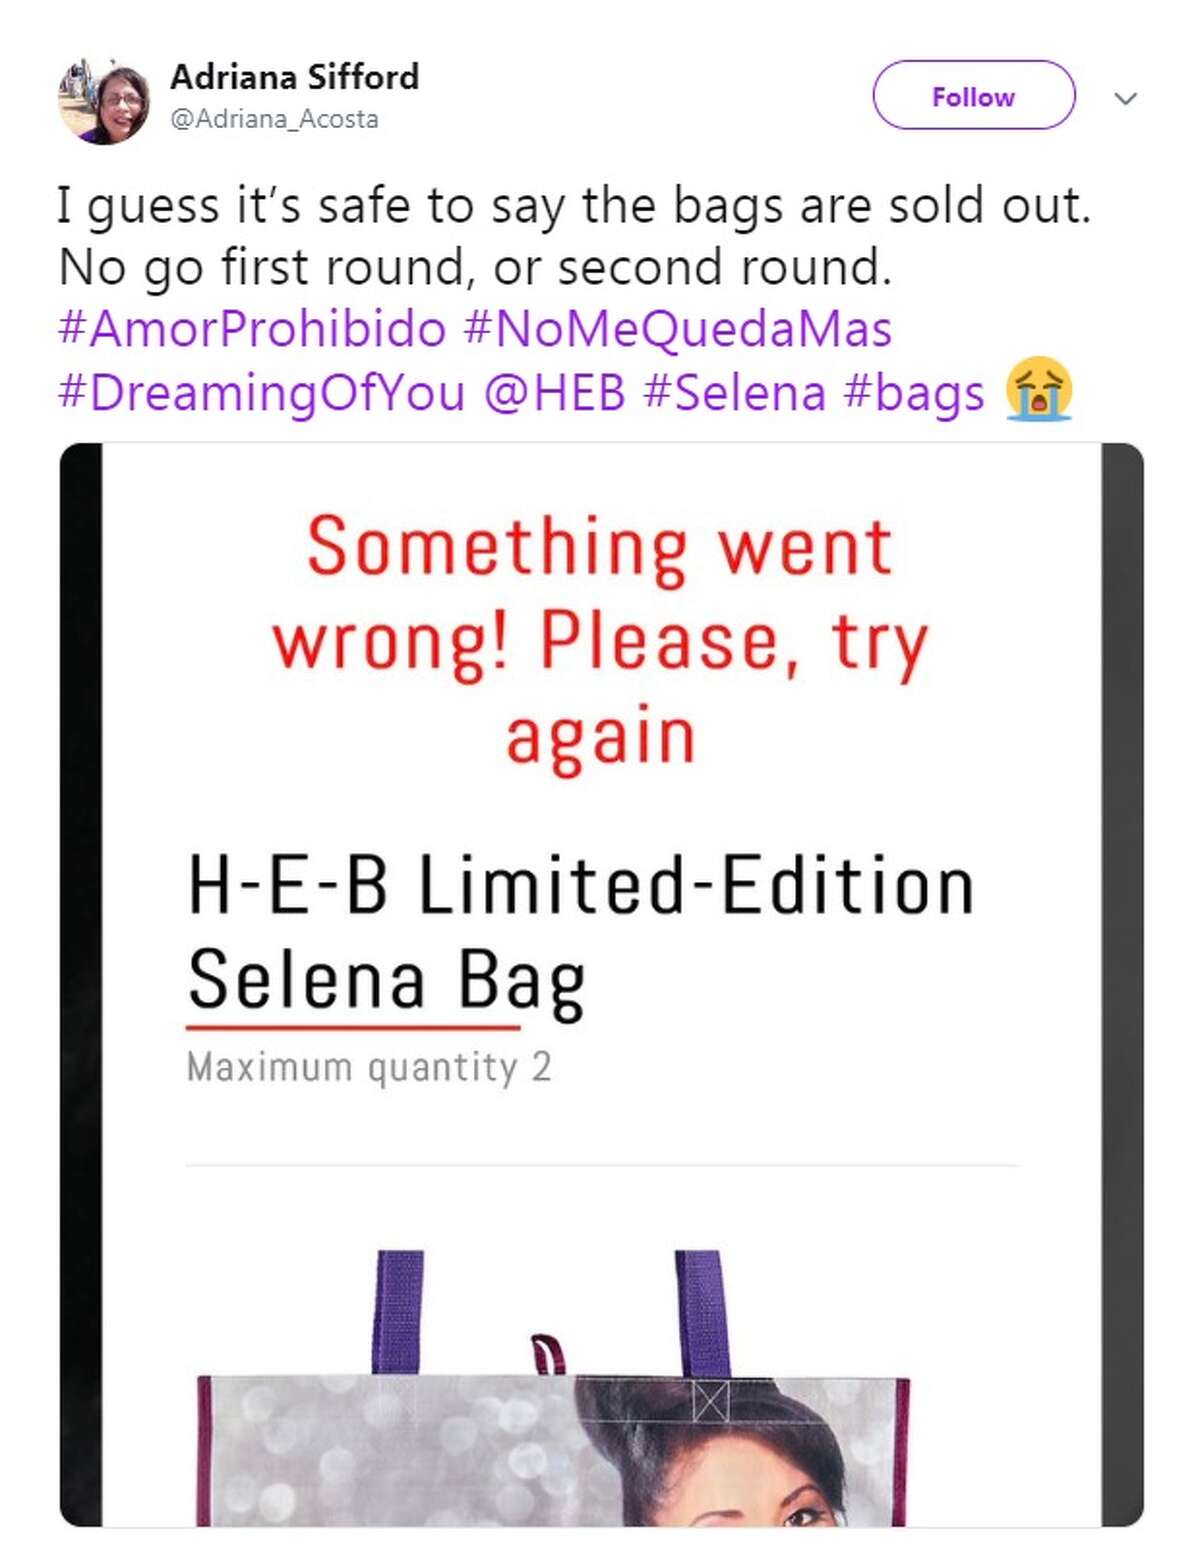 @Adriana_Acosta: I guess it's safe to say the bags are sold out. No go first round, or second round. #AmorProhibido #NoMeQuedaMas #DreamingOfYou @HEB #Selena #bags